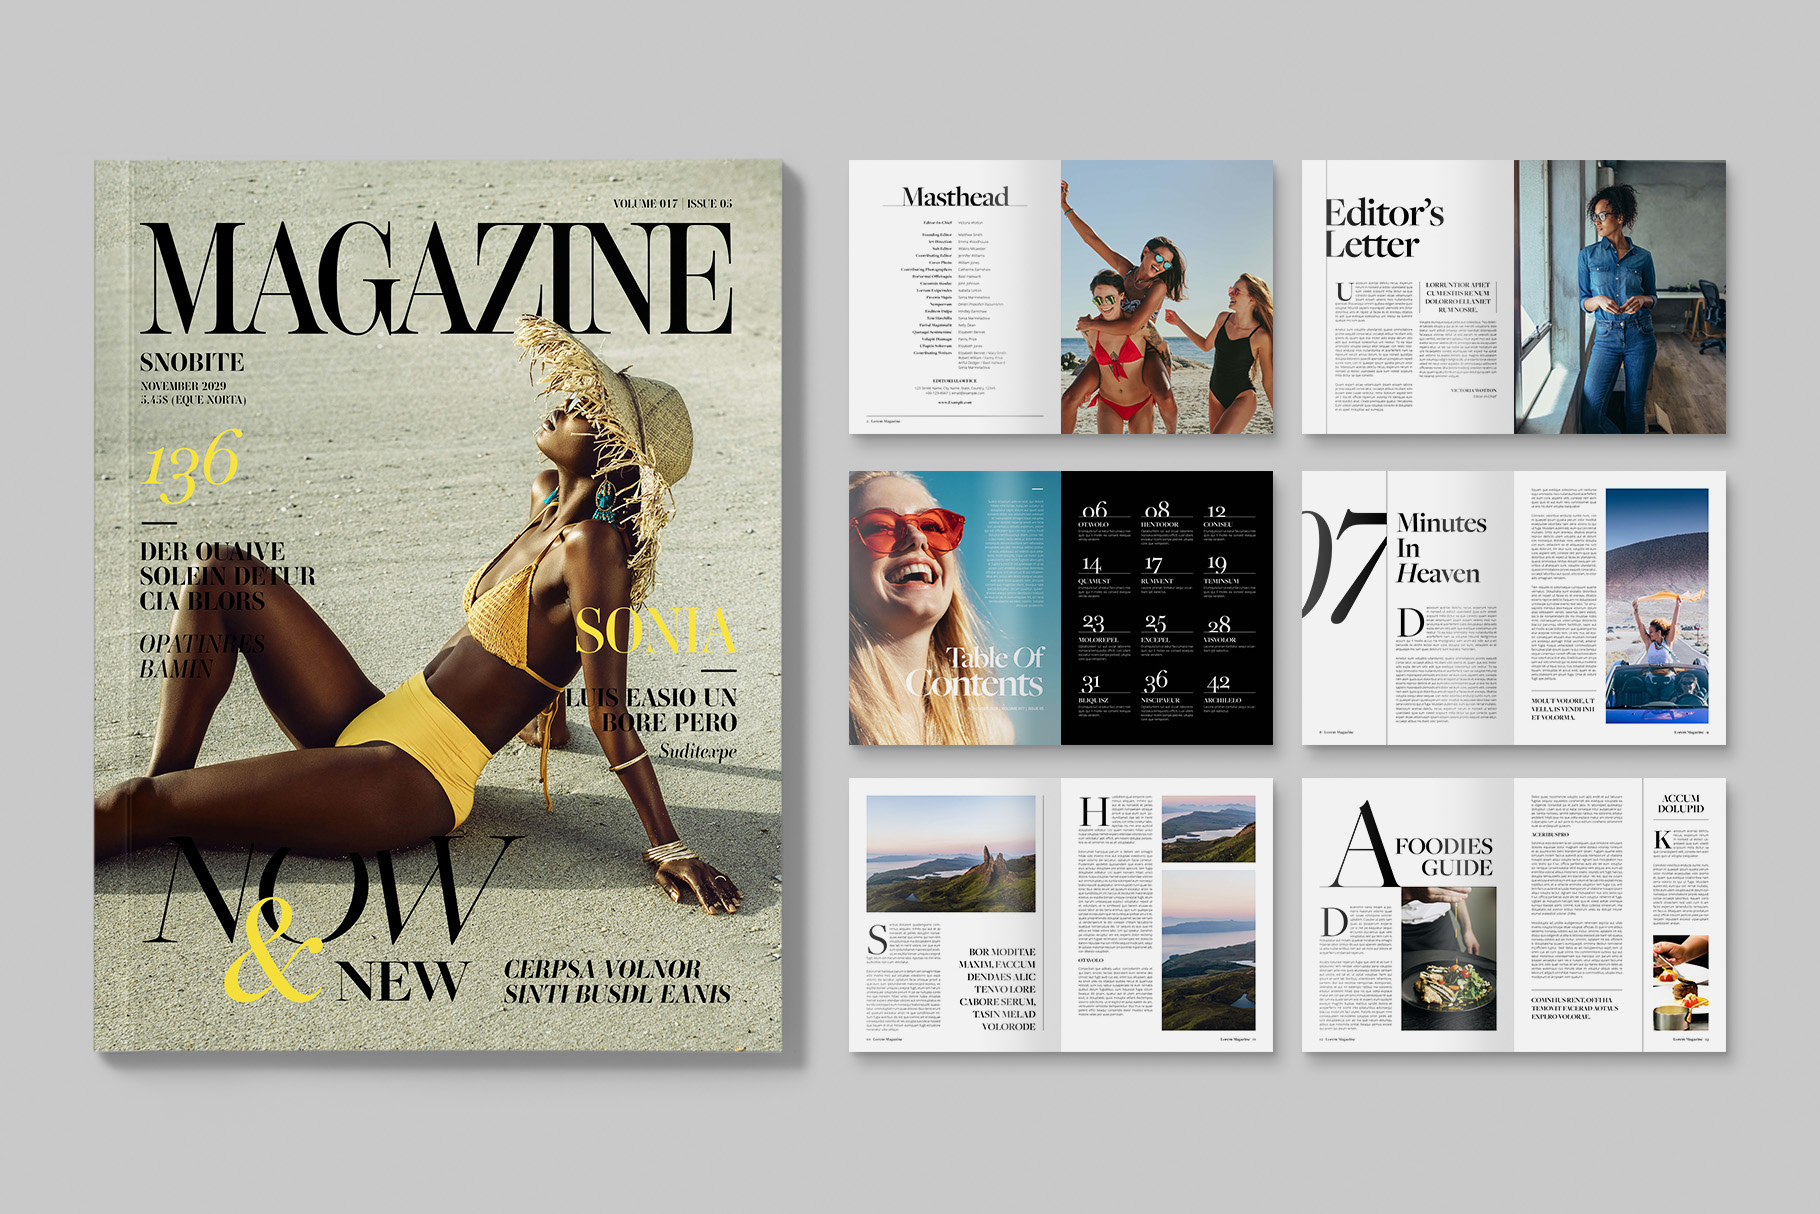 Magazine Template in InDesign INDD format